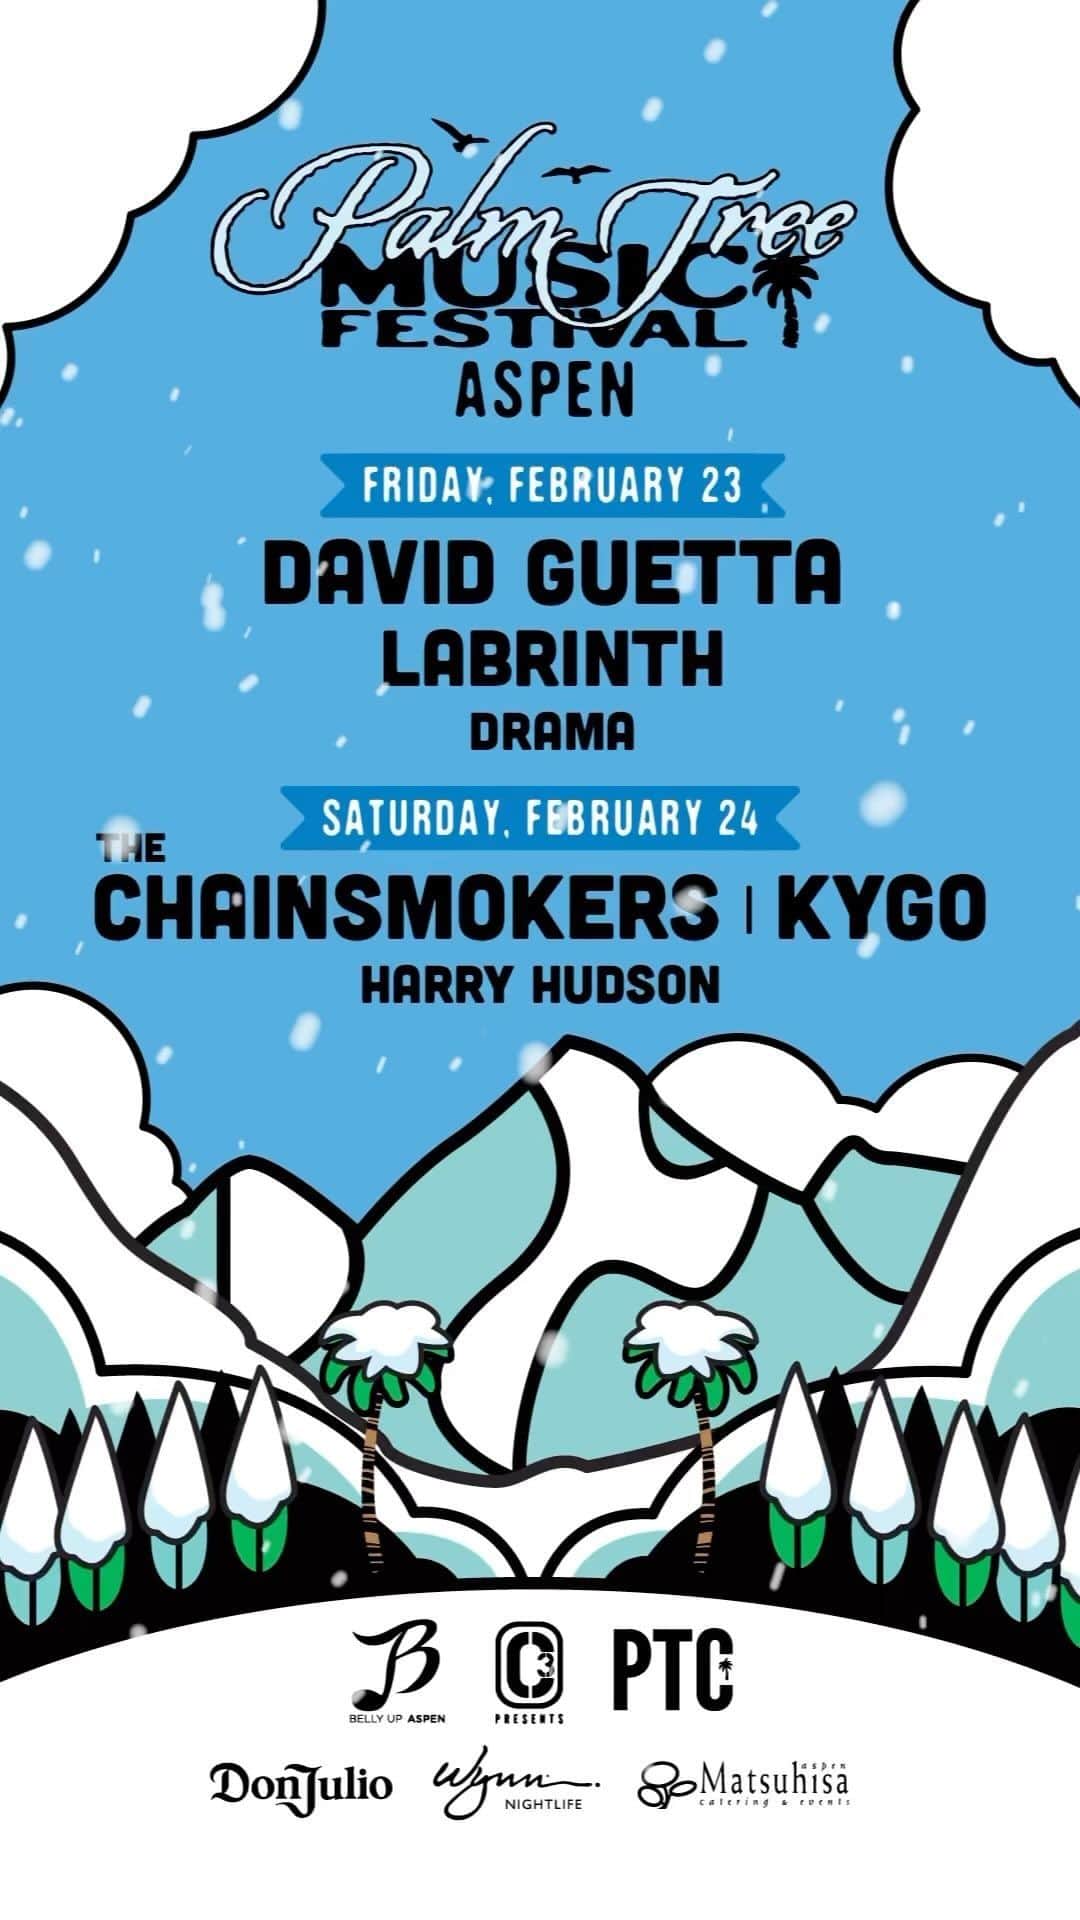 KYGOのインスタグラム：「I am so excited to be joining  @davidguetta, @thechainsmokers & more to close out the weekend for the 2nd annual Palm Tree Festival in Aspen, CO on 2/24. It’s going to be an epic festival weekend. Pre-Sale begins Thursday 10/5 @ 10AM MT so sign up through the link in my bio to redeem the passcode!」